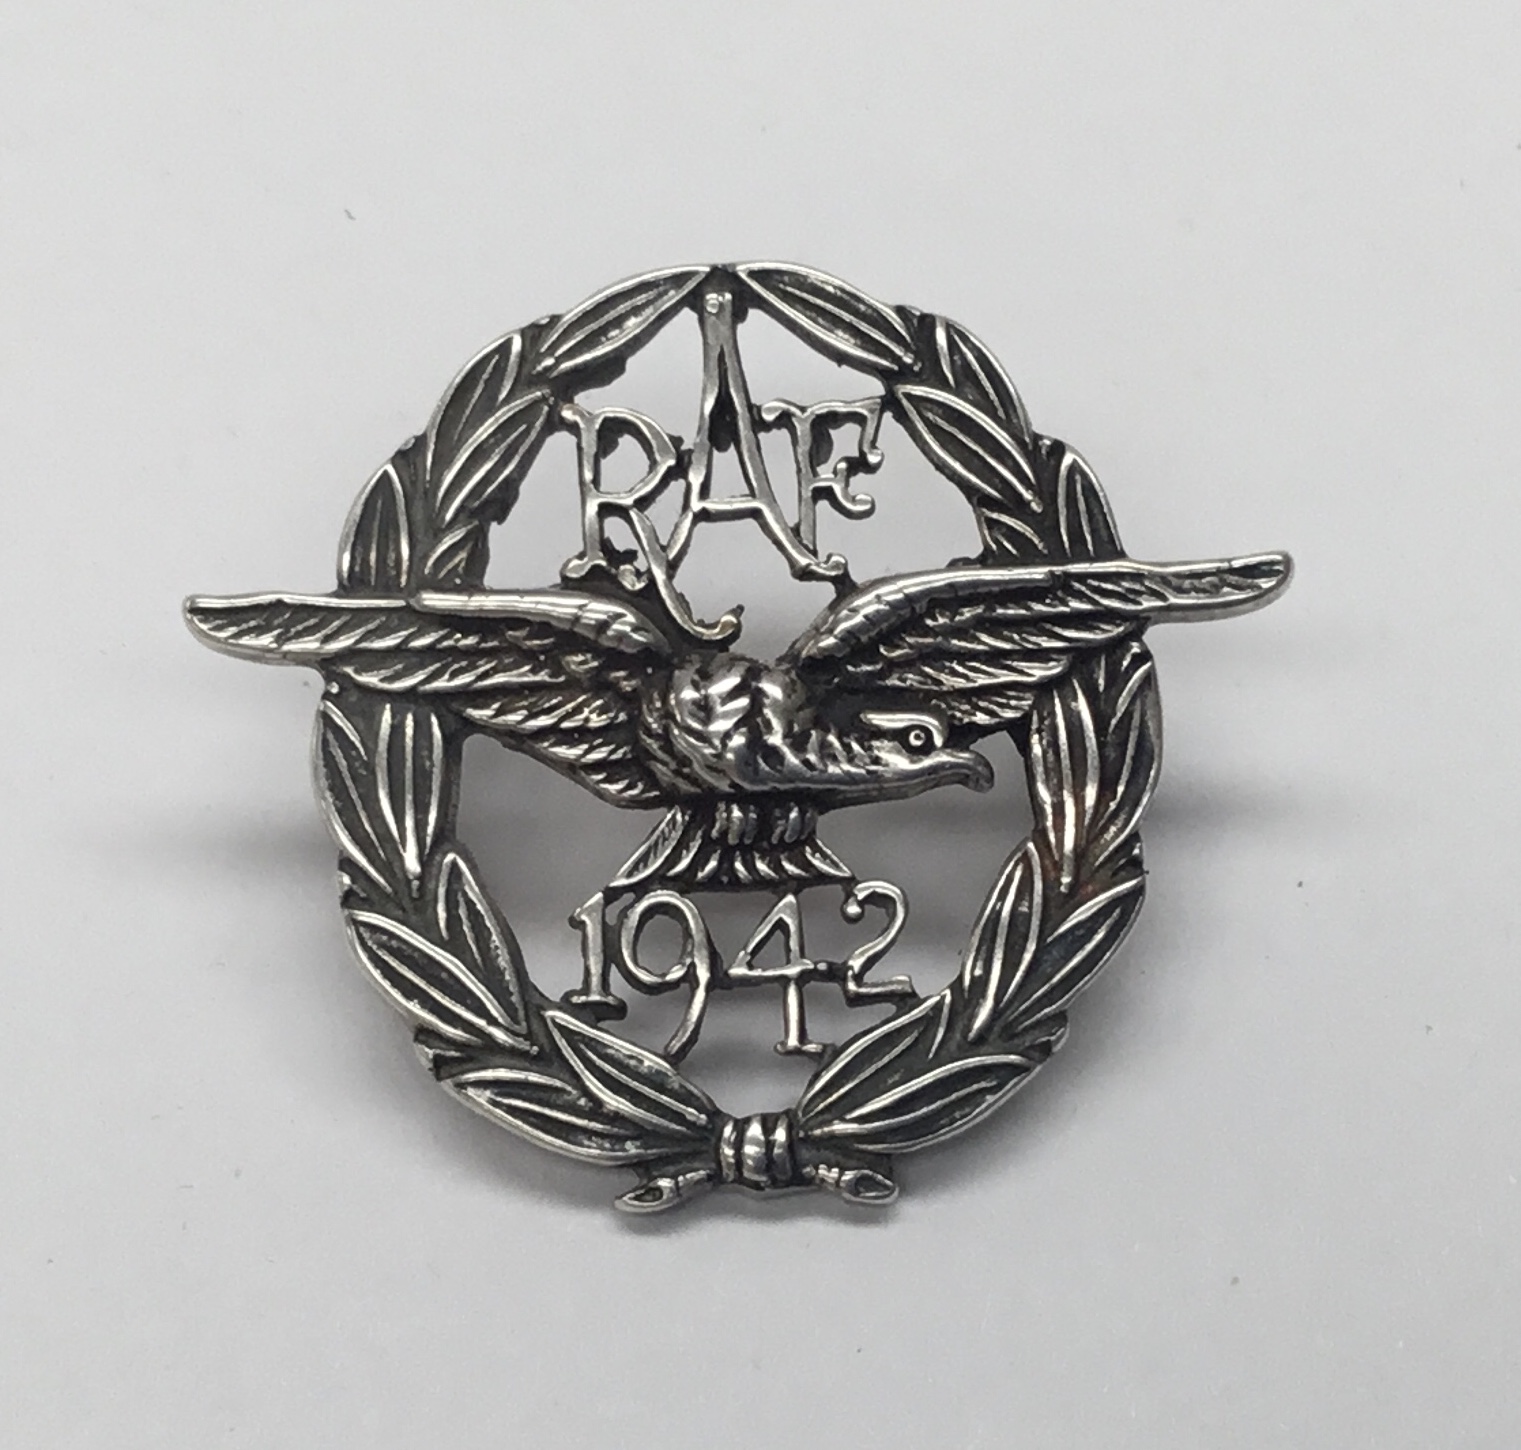 *** WITHDRAWN *** An extremely rare sterling silver WW2 era ‘1942’ American RAF Foreign Volunteer